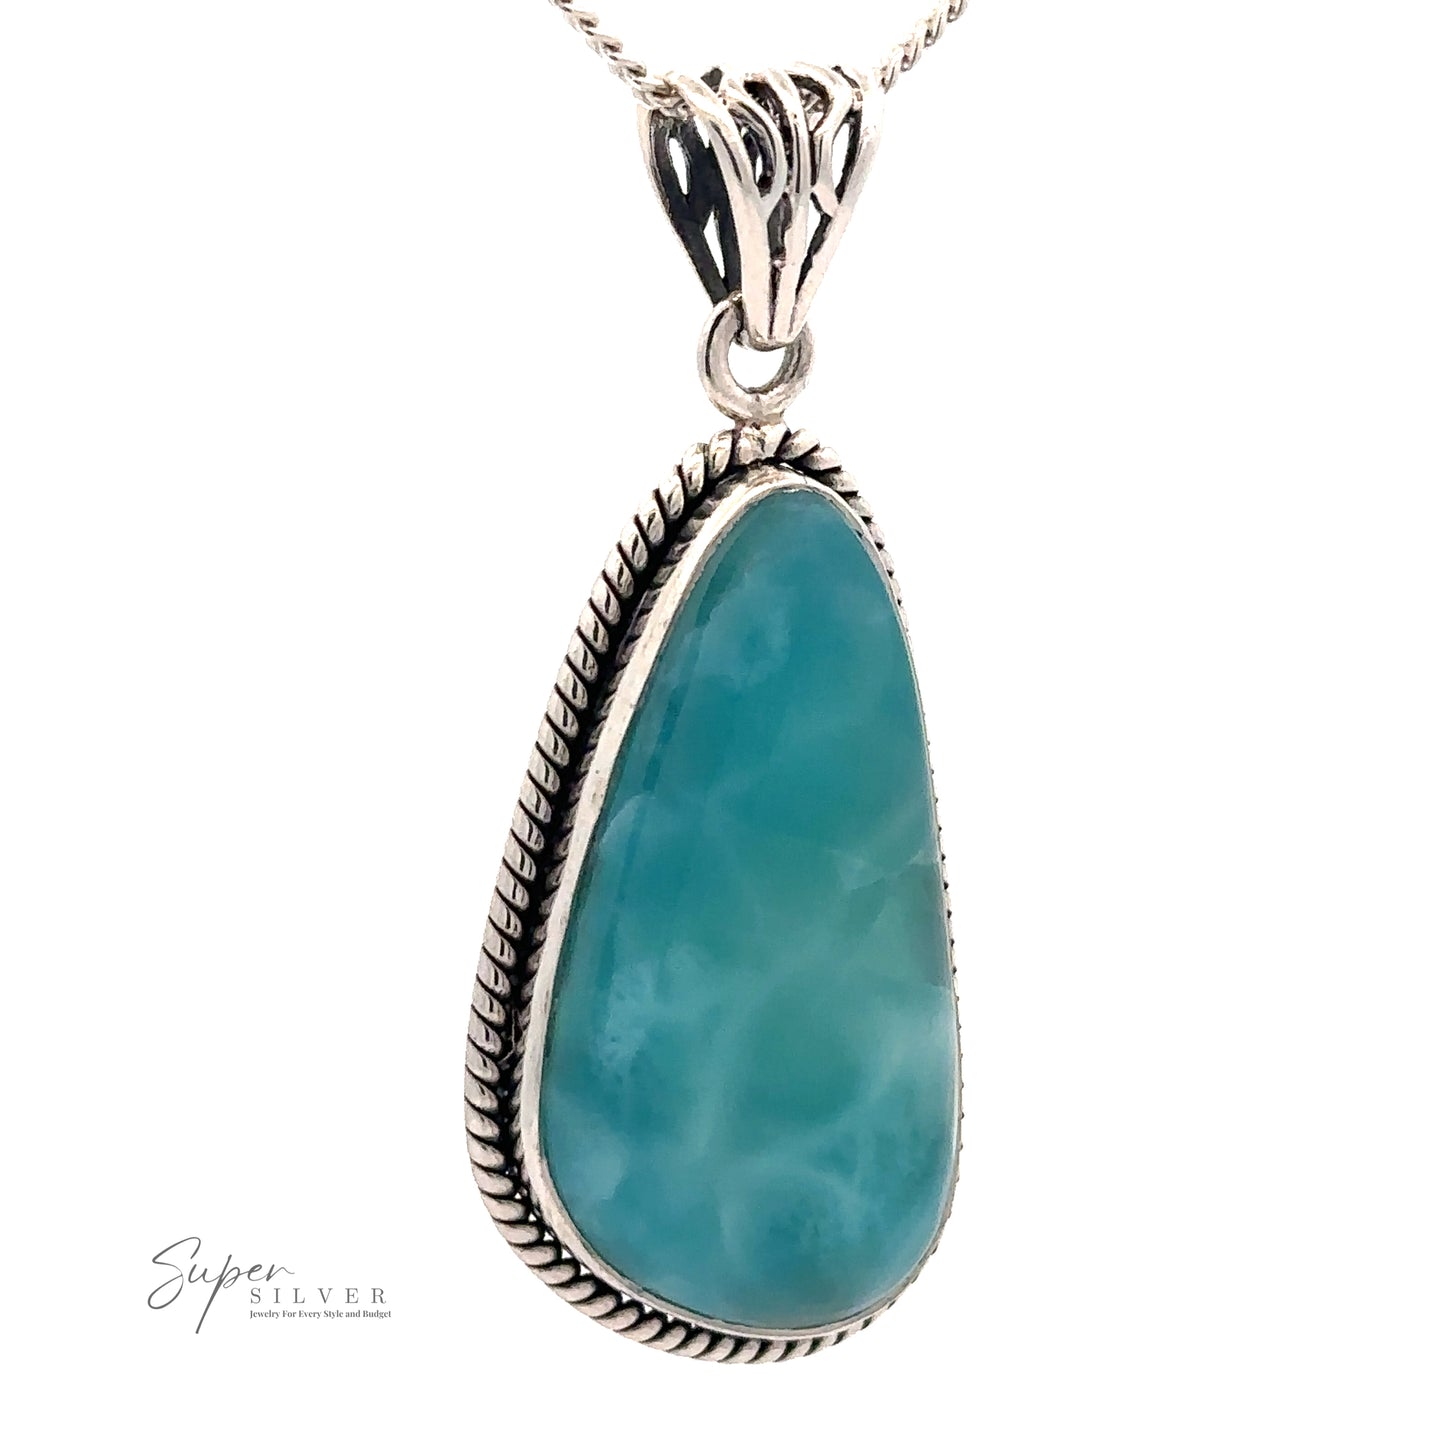 
                  
                    A deep blue Larimar Pendant with Rope Border, encased in an ornate sterling silver setting, hangs on a gleaming silver chain. The text "Super Silver" appears in the bottom left corner.
                  
                